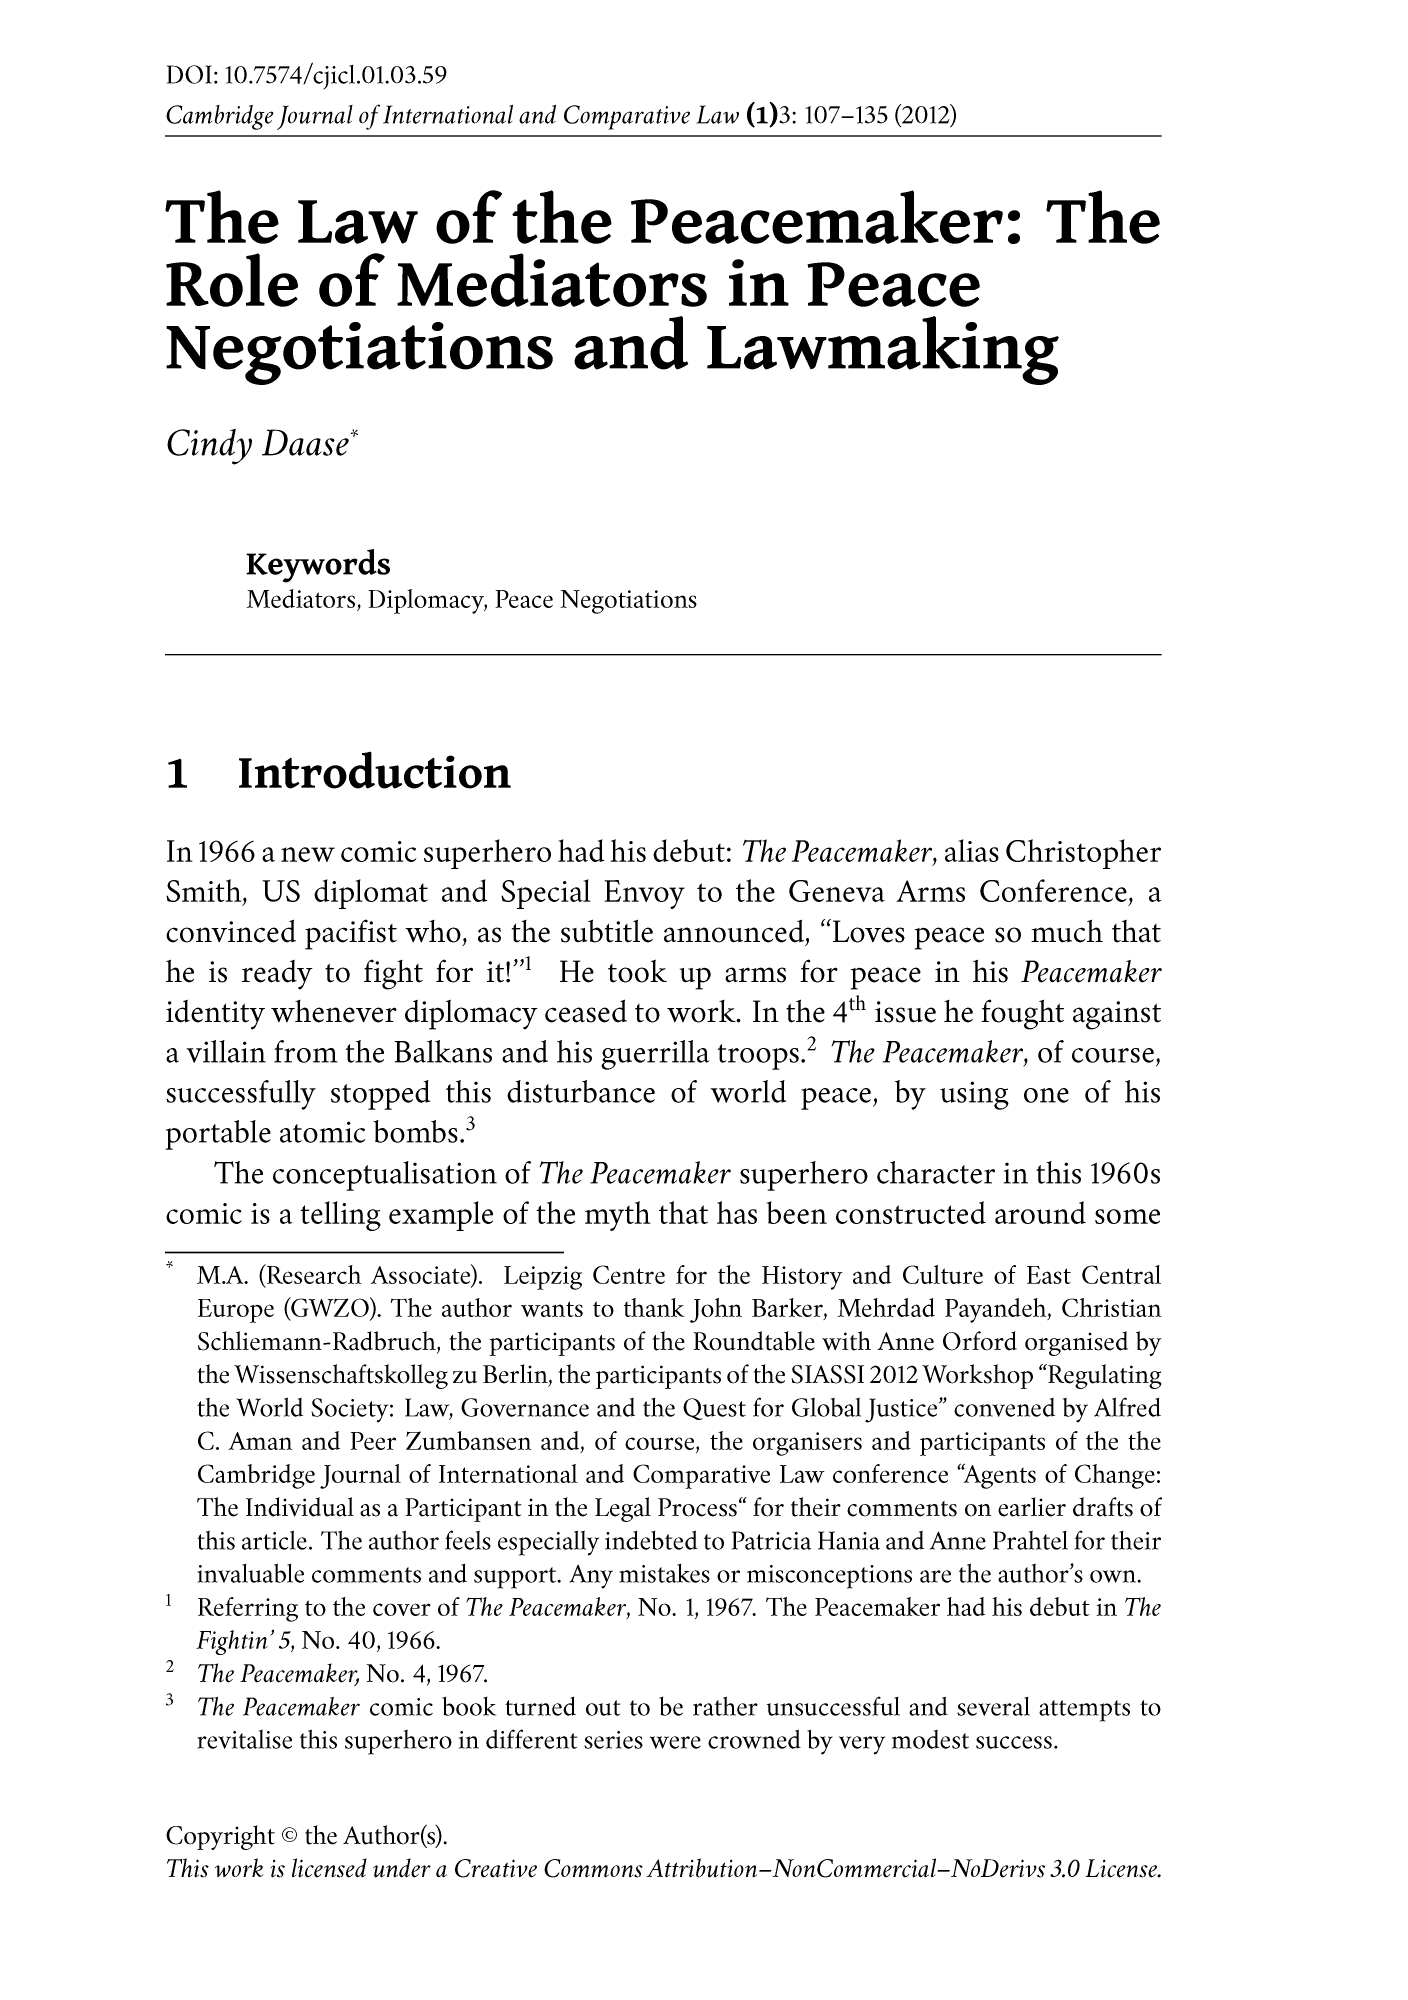 handle is hein.journals/cajoincla1 and id is 507 raw text is: DOI: 10.7574/cjicl.01.03.59
Cambridge journal of International and Comparative Law (1)3: 107-135 (2012)
The Law of the Peacemaker: The
Role of Mediators in Peace
Negotiations and Lawmaking
Cindy Daase'
Keywords
Mediators, Diplomacy, Peace Negotiations
1 Introduction
In 1966 a new comic superhero had his debut: The Peacemaker, alias Christopher
Smith, US diplomat and Special Envoy to the Geneva Arms Conference, a
convinced pacifist who, as the subtitle announced, Loves peace so much that
he is ready to fight for it!' He took up arms for peace in his Peacemaker
identity whenever diplomacy ceased to work. In the 4th issue he fought against
a villain from the Balkans and his guerrilla troops.2 The Peacemaker, of course,
successfully stopped this disturbance of world peace, by using one of his
portable atomic bombs.3
The conceptualisation of The Peacemaker superhero character in this 1960s
comic is a telling example of the myth that has been constructed around some
M.A. (Research Associate). Leipzig Centre for the History and Culture of East Central
Europe (GWZO). The author wants to thank John Barker, Mehrdad Payandeh, Christian
Schliemann-Radbruch, the participants of the Roundtable with Anne Orford organised by
the Wissenschaftskolleg zu Berlin, the participants of the SIASSI 2012 Workshop Regulating
the World Society: Law, Governance and the Quest for Global Justice convened by Alfred
C. Aman and Peer Zumbansen and, of course, the organisers and participants of the the
Cambridge Journal of International and Comparative Law conference Agents of Change:
The Individual as a Participant in the Legal Process for their comments on earlier drafts of
this article. The author feels especially indebted to Patricia Hania and Anne Prahtel for their
invaluable comments and support. Any mistakes or misconceptions are the author's own.
1Referring to the cover of The Peacemaker, No. 1, 1967. The Peacemaker had his debut in The
Fightin'5, No. 40, 1966.
2 The Peacemaker, No. 4, 1967.
3 The Peacemaker comic book turned out to be rather unsuccessful and several attempts to
revitalise this superhero in different series were crowned by very modest success.
Copyright © the Author(s).
This work is licensed under a Creative Commons Attribution-NonCommercial-NoDerivs 3.0 License.


